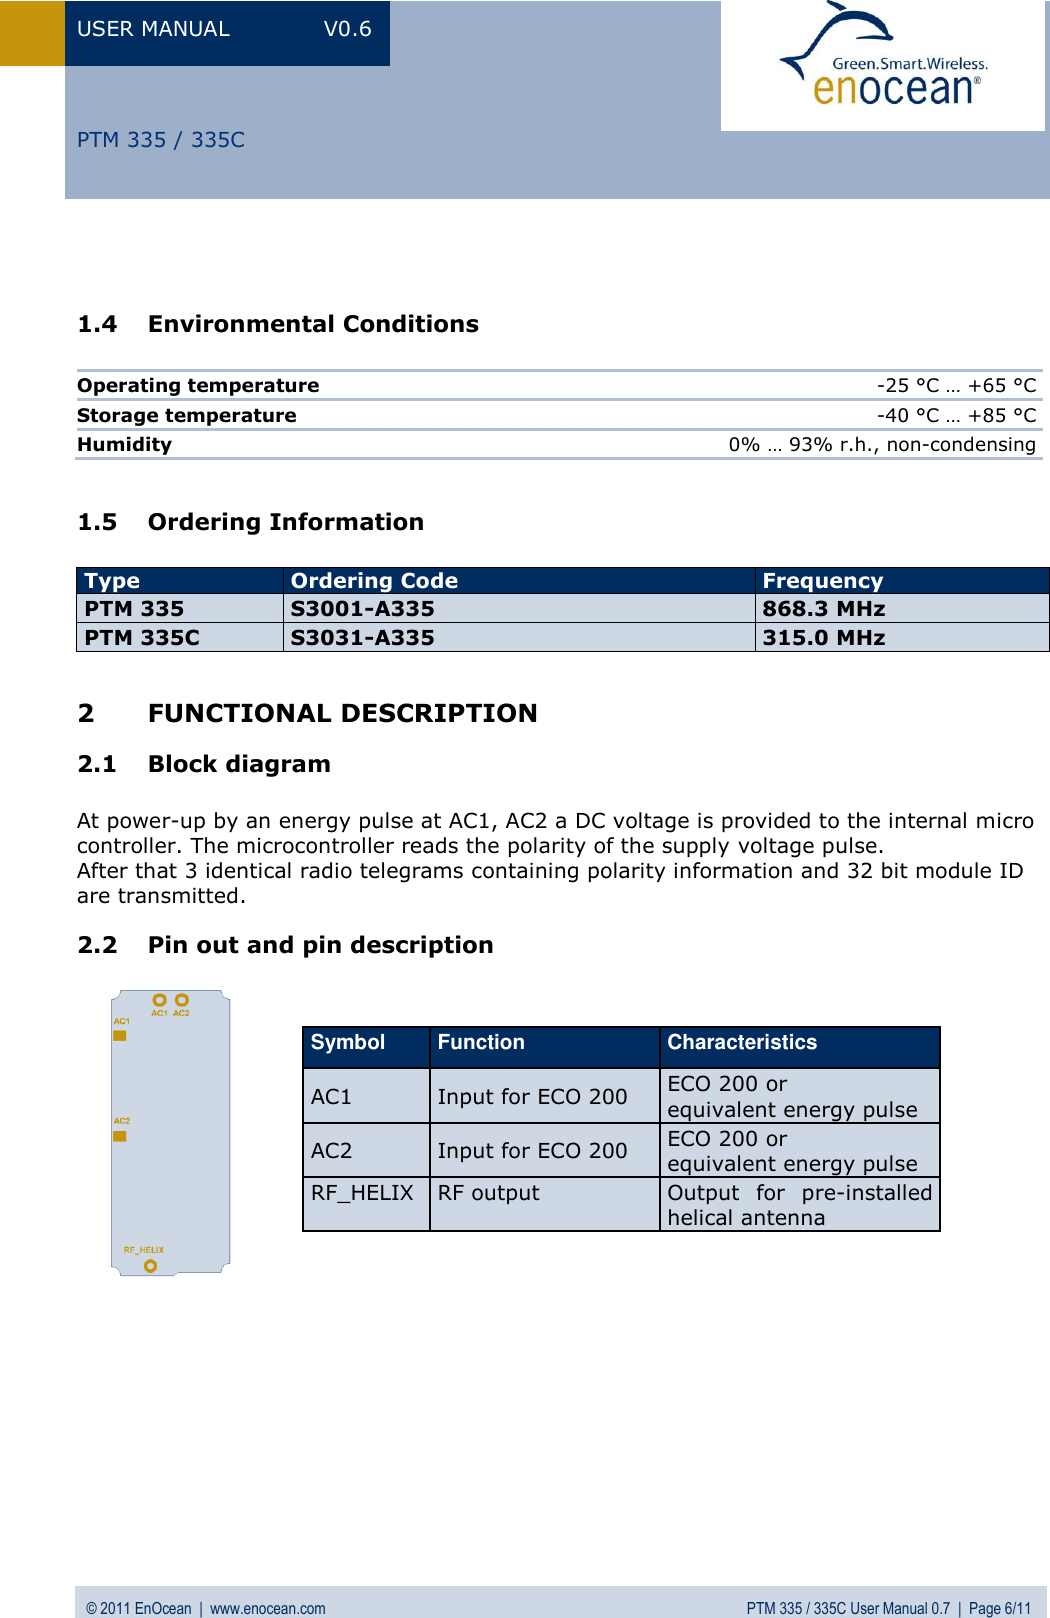 USER MANUAL  V0.6 © 2011 EnOcean  |  www.enocean.com  PTM 335 / 335C User Manual 0.7  |  Page 6/11   PTM 335 / 335C   1.4 Environmental Conditions  Operating temperature  -25 °C … +65 °C Storage temperature  -40 °C … +85 °C Humidity 0% … 93% r.h., non-condensing  1.5 Ordering Information  Type Ordering Code Frequency PTM 335 S3001-A335 868.3 MHz PTM 335C S3031-A335 315.0 MHz  2 FUNCTIONAL DESCRIPTION 2.1 Block diagram  At power-up by an energy pulse at AC1, AC2 a DC voltage is provided to the internal micro controller. The microcontroller reads the polarity of the supply voltage pulse.  After that 3 identical radio telegrams containing polarity information and 32 bit module ID are transmitted. 2.2 Pin out and pin description                     Symbol Function Characteristics AC1 Input for ECO 200 ECO 200 or  equivalent energy pulse  AC2 Input for ECO 200 ECO 200 or  equivalent energy pulse  RF_HELIX RF output Output  for  pre-installed helical antenna 